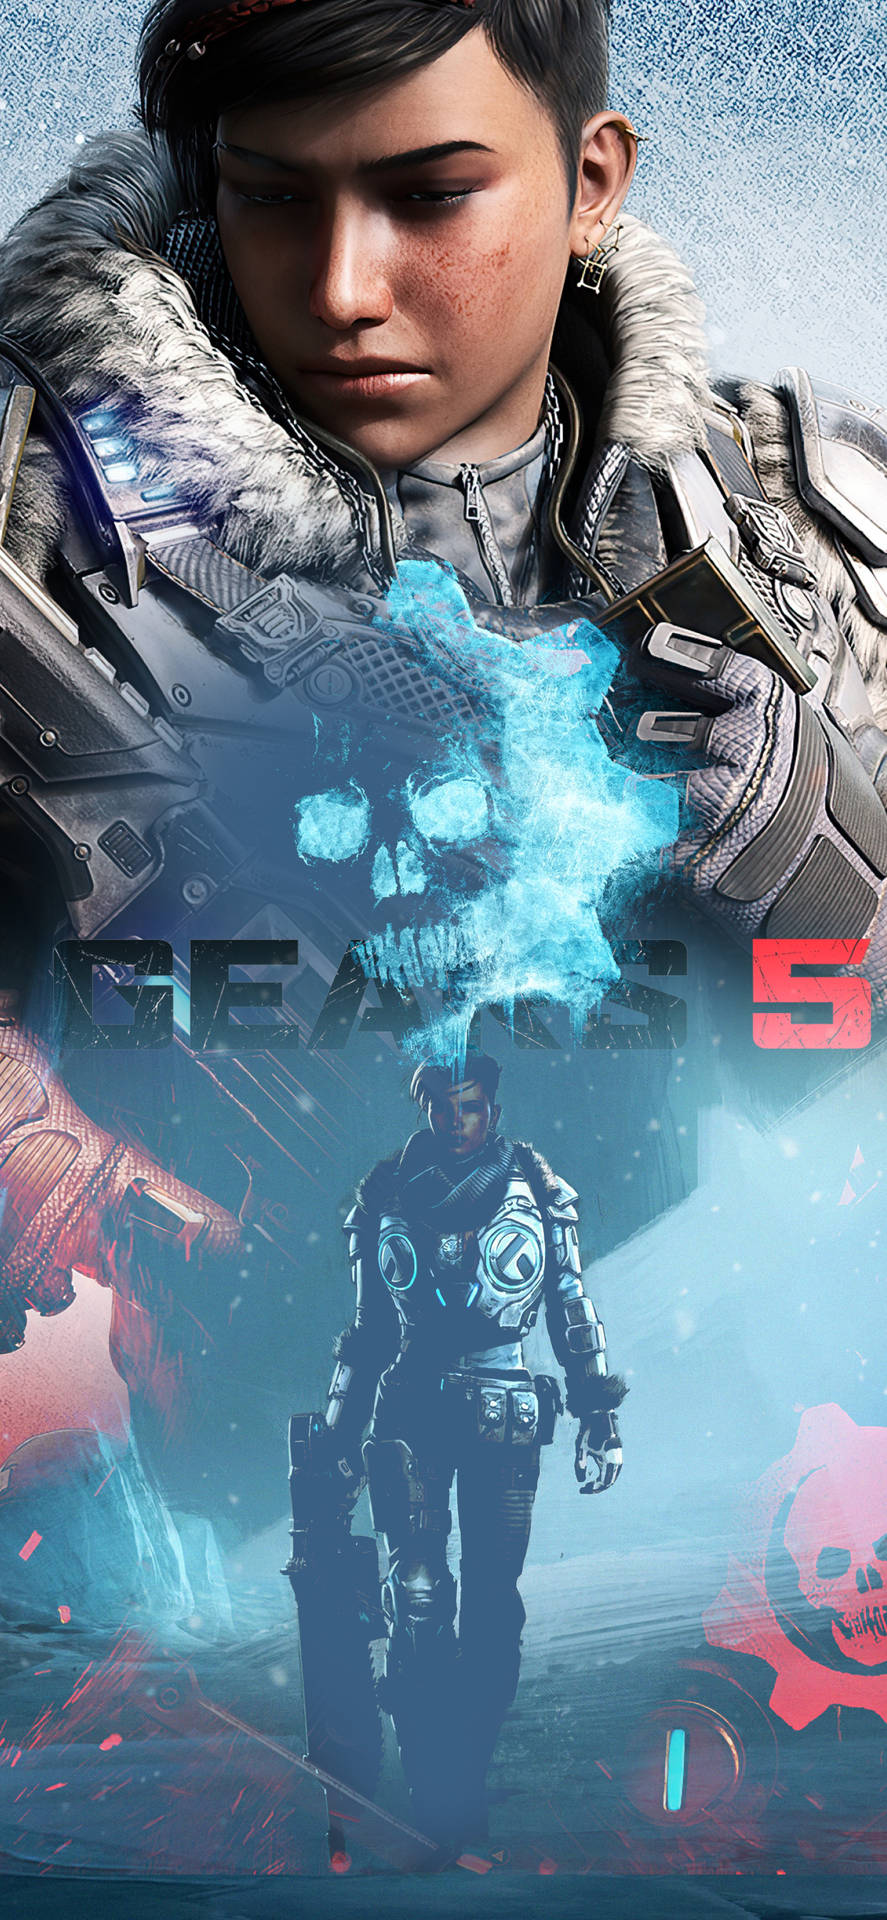 Kait Diaz Of Gears 5 Iphone Background